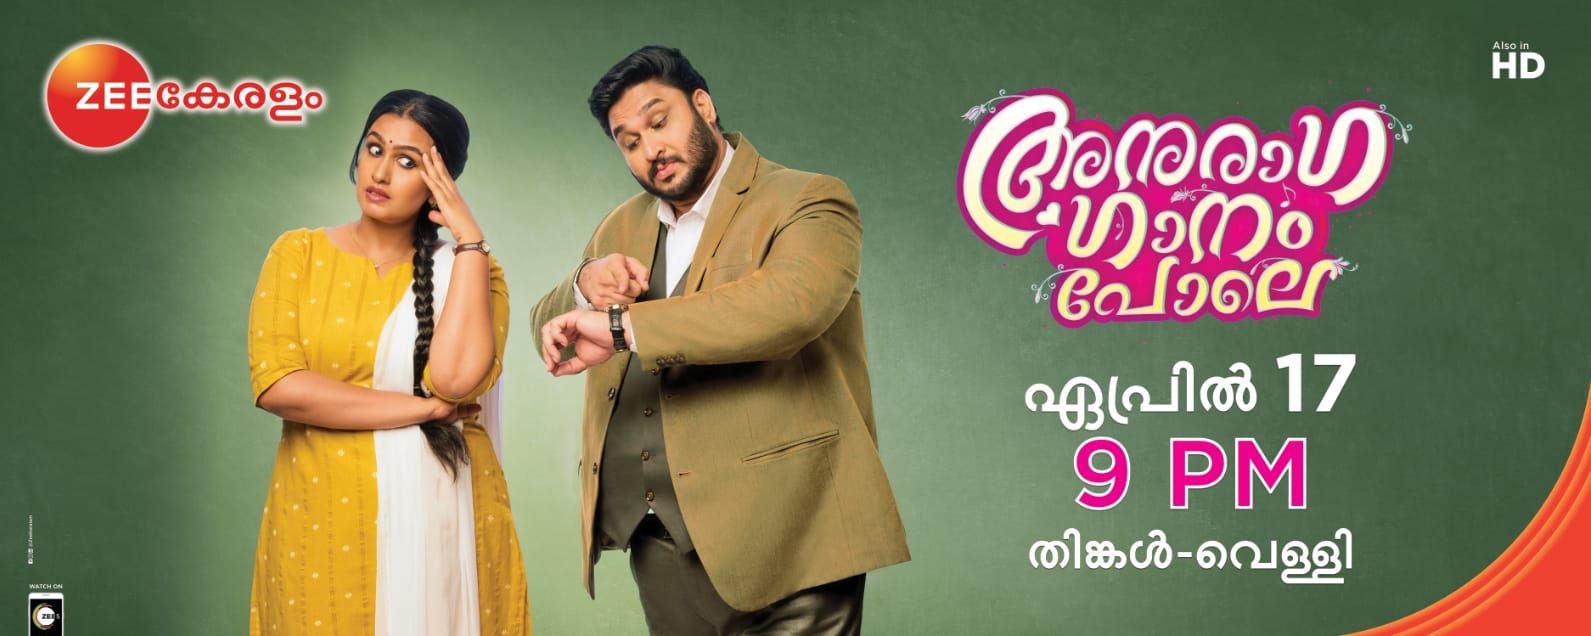 Anuraga Ganam Pole Serial Zee Keralam Staring Kavitha Nair and Prince in Lead - Launching on 17 April at 09:00 PM 5